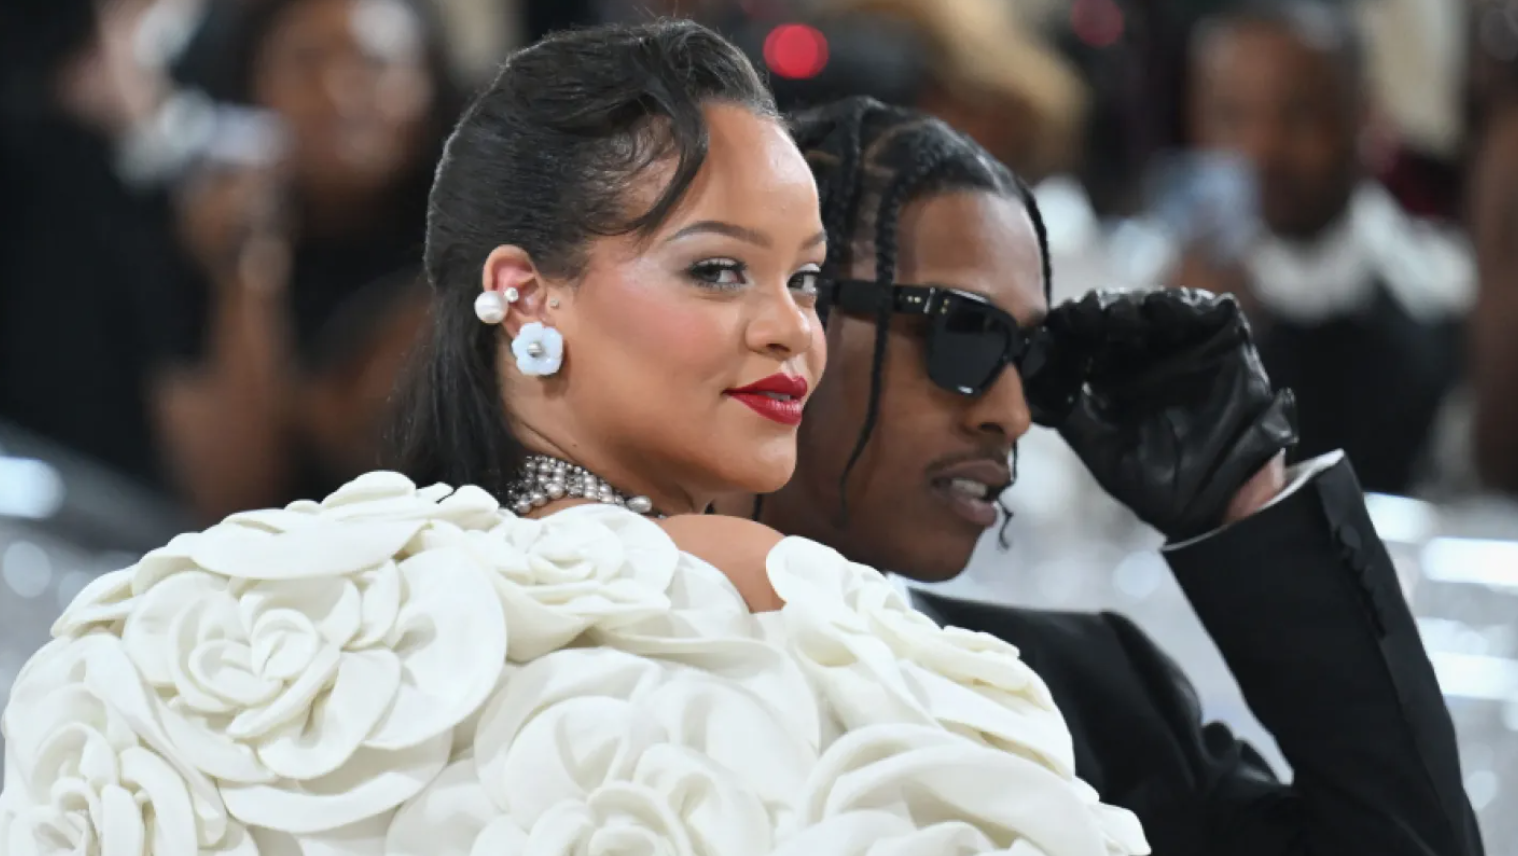 Rihanna Says She’s Down To Have More Kids To “Try For My Girl”